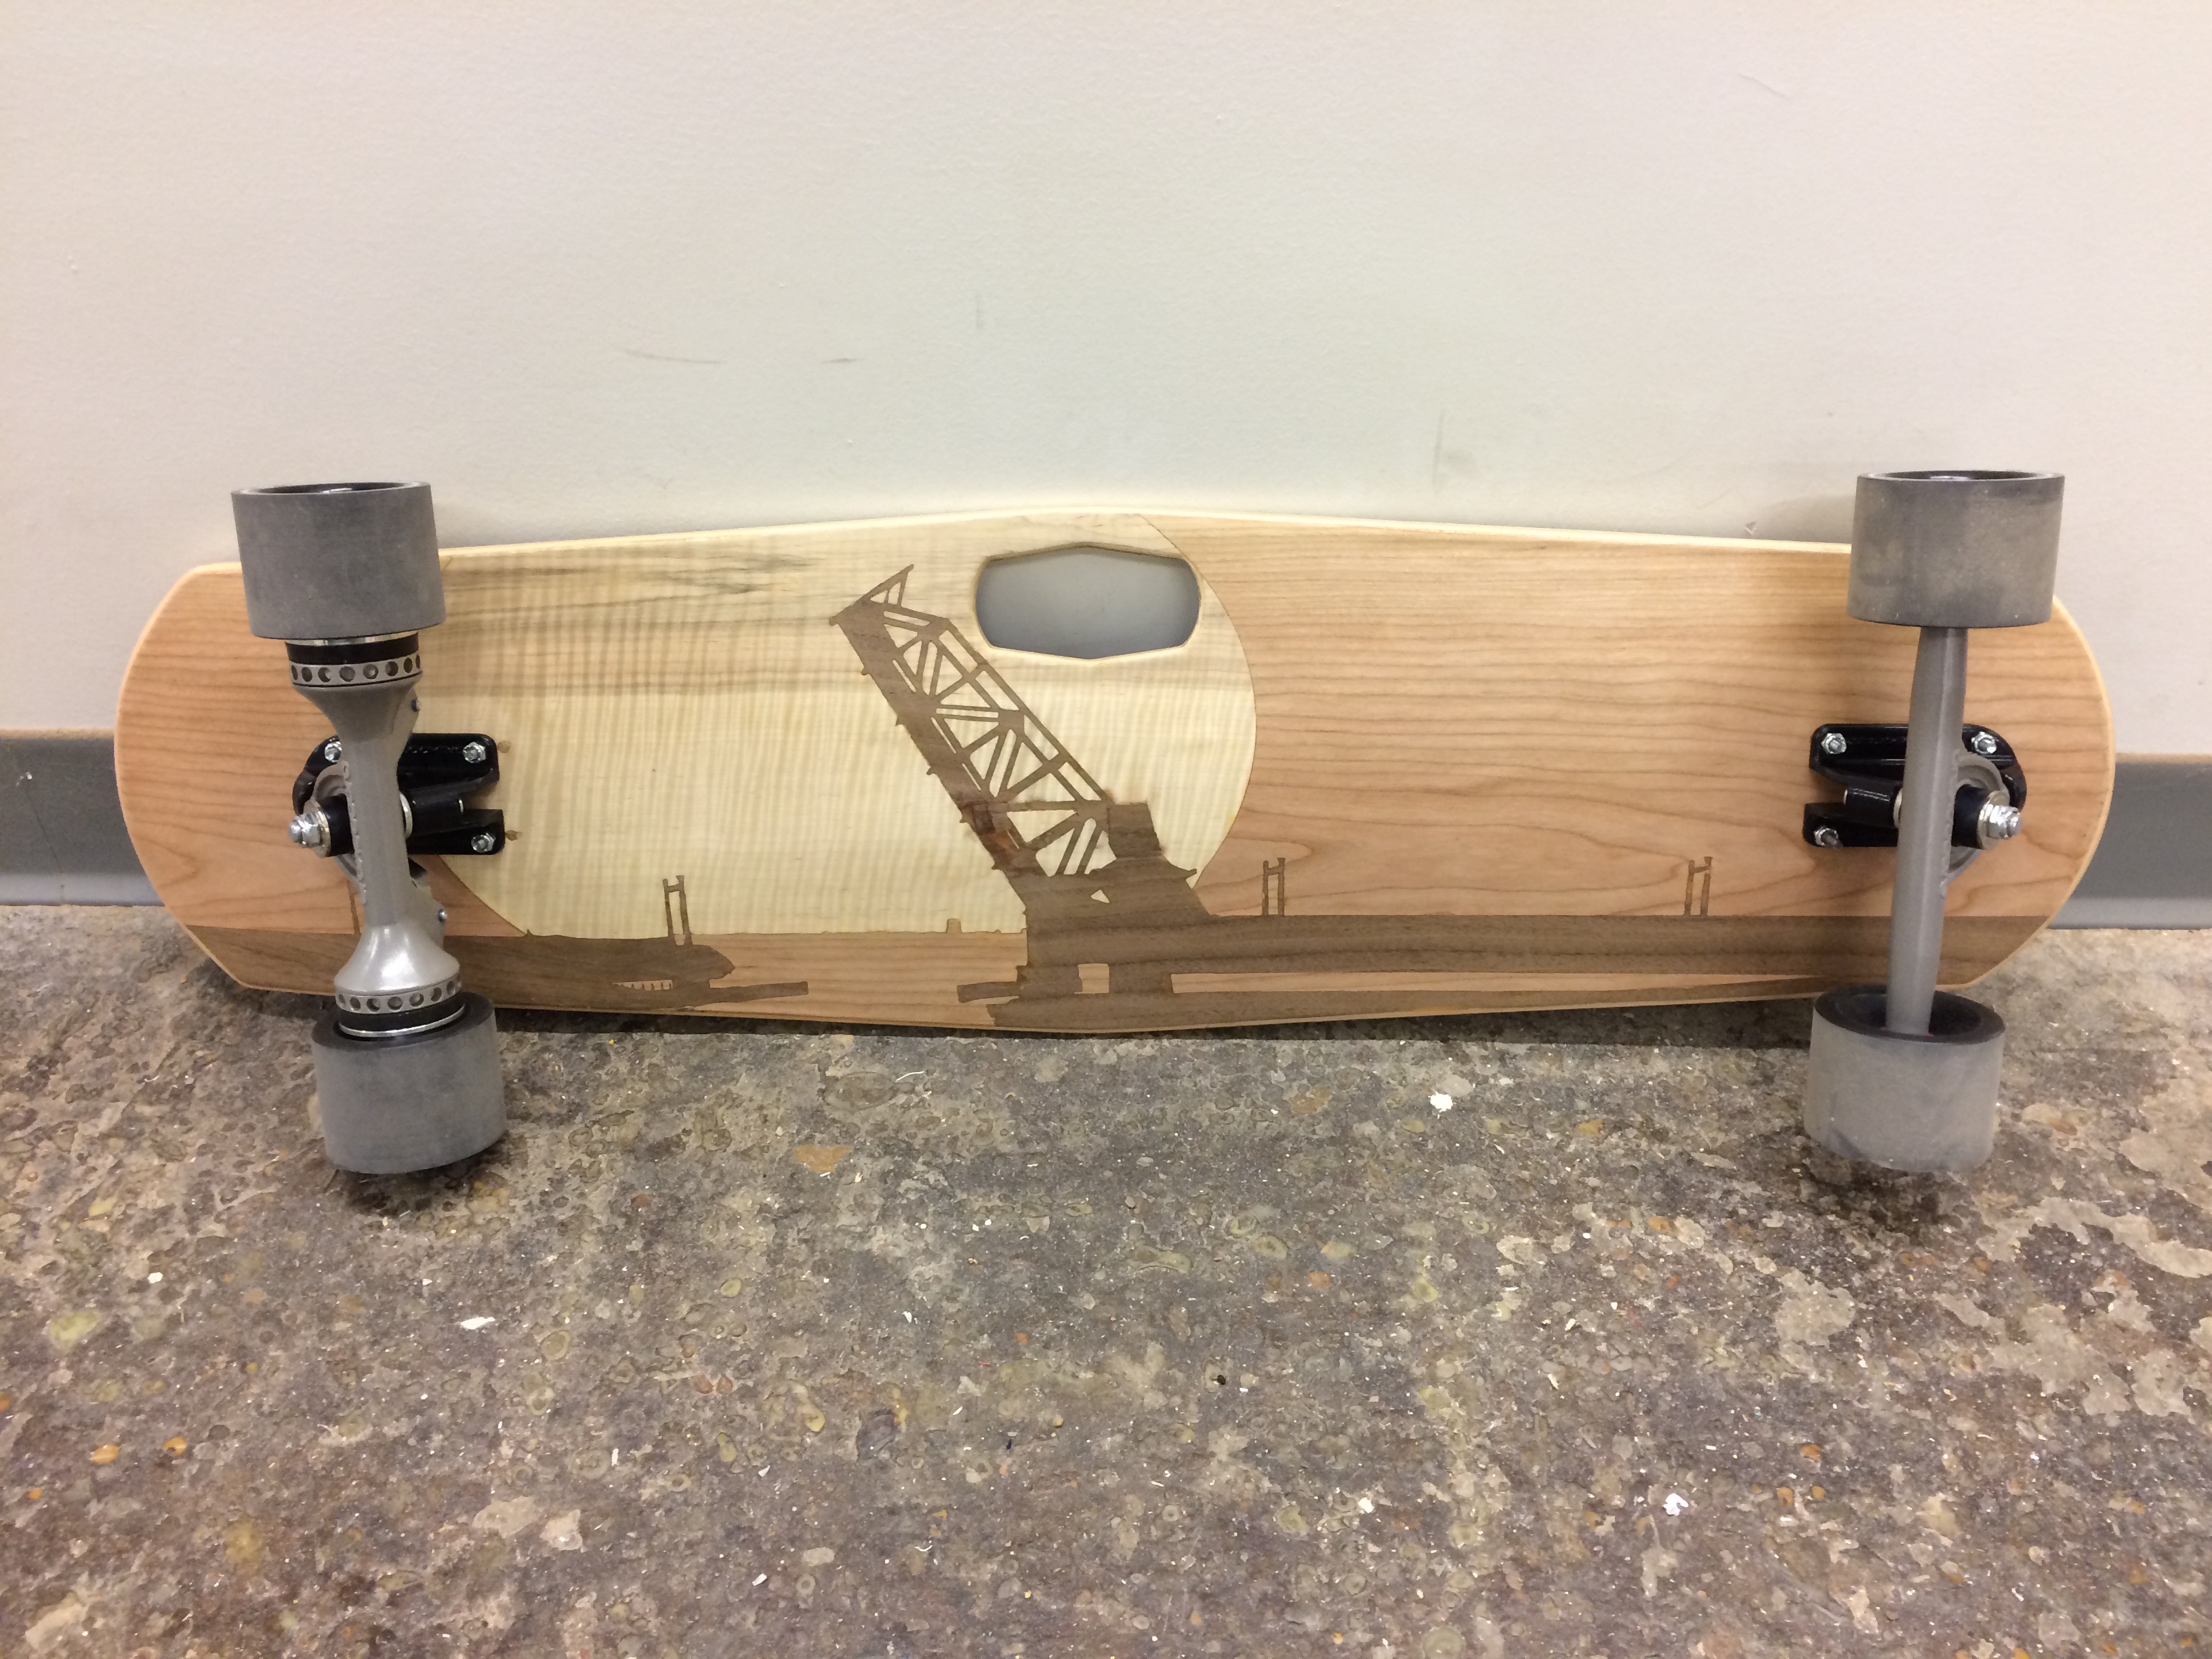 I taught a skateboard building class at the MIT Hobby Shop. I built this board as an example for the class.